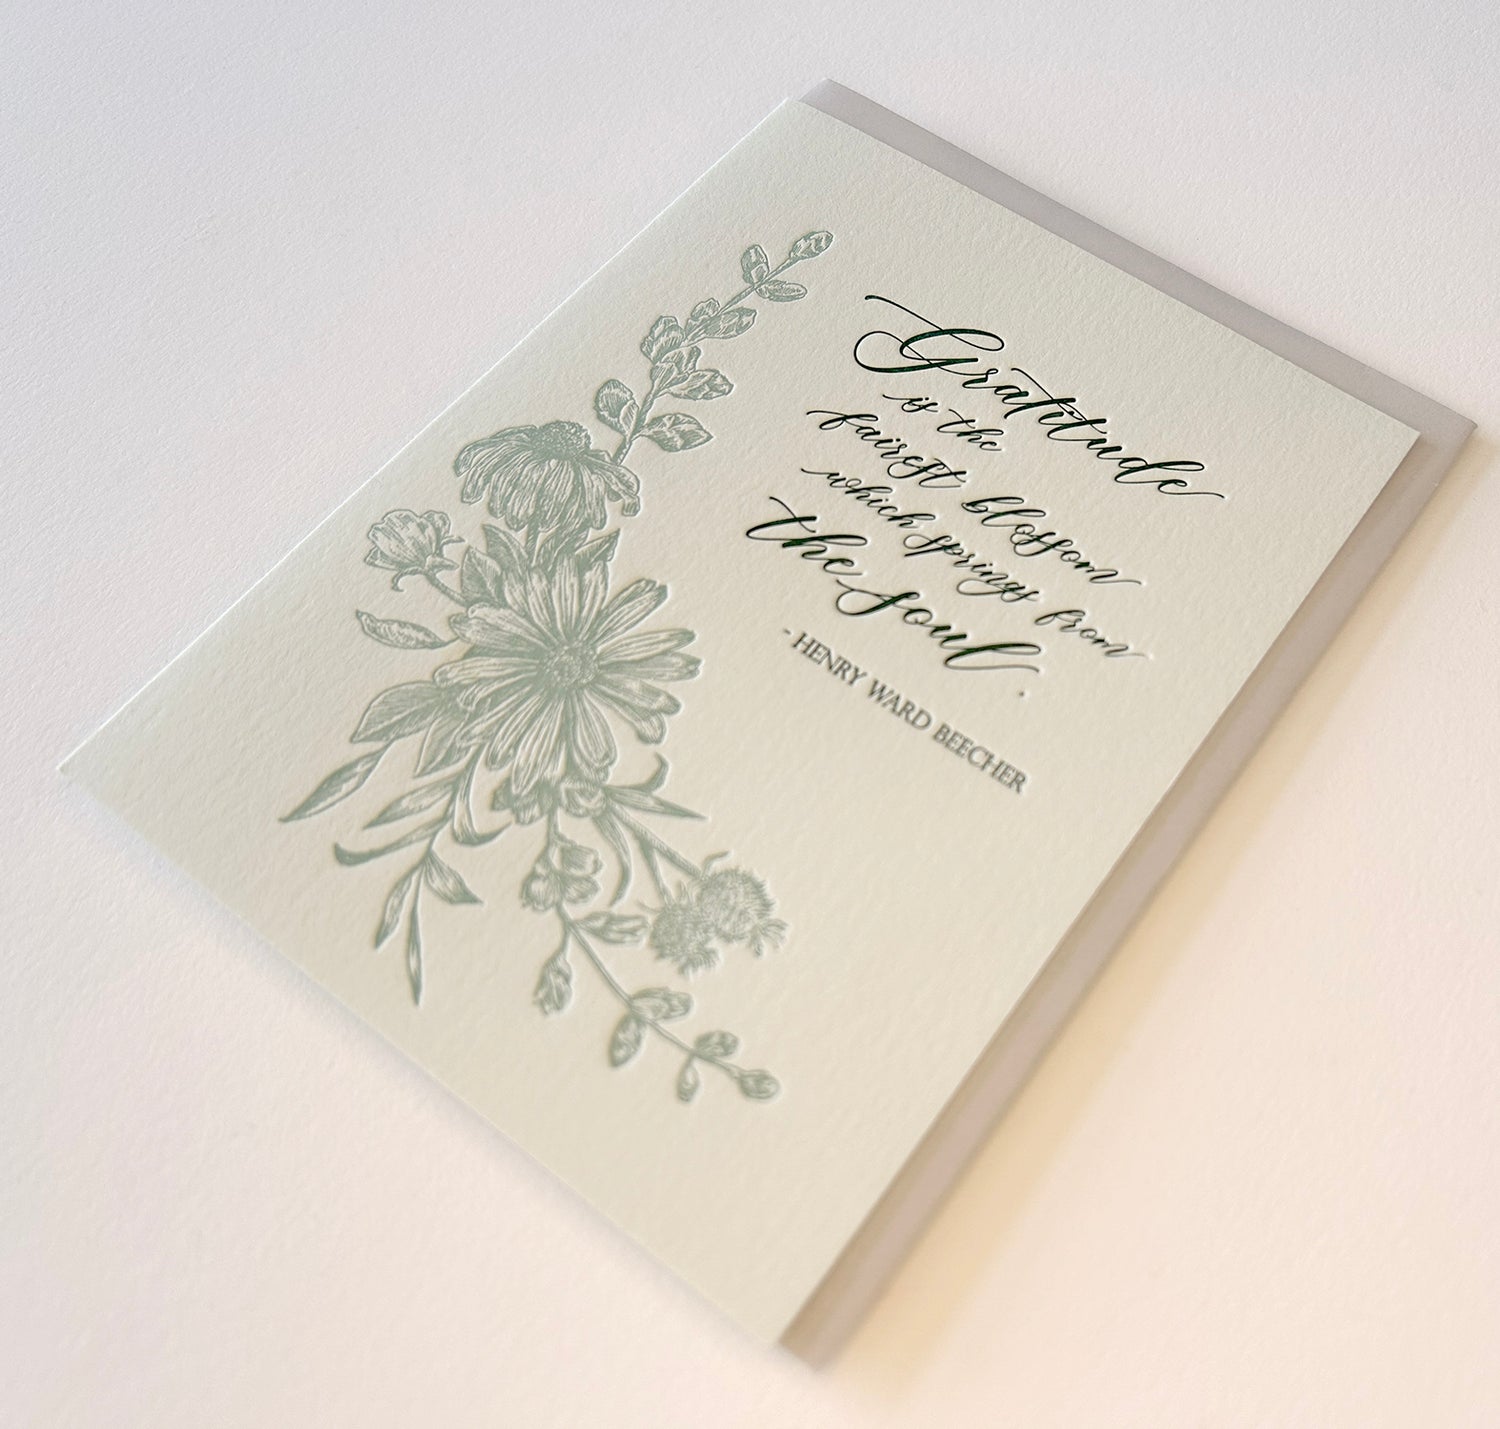 Letterpress gratitude card with florals that says "'Gratitude is the fairest blossom which springs from the soul.'- Henry Ward Beecher" by Rust Belt Love